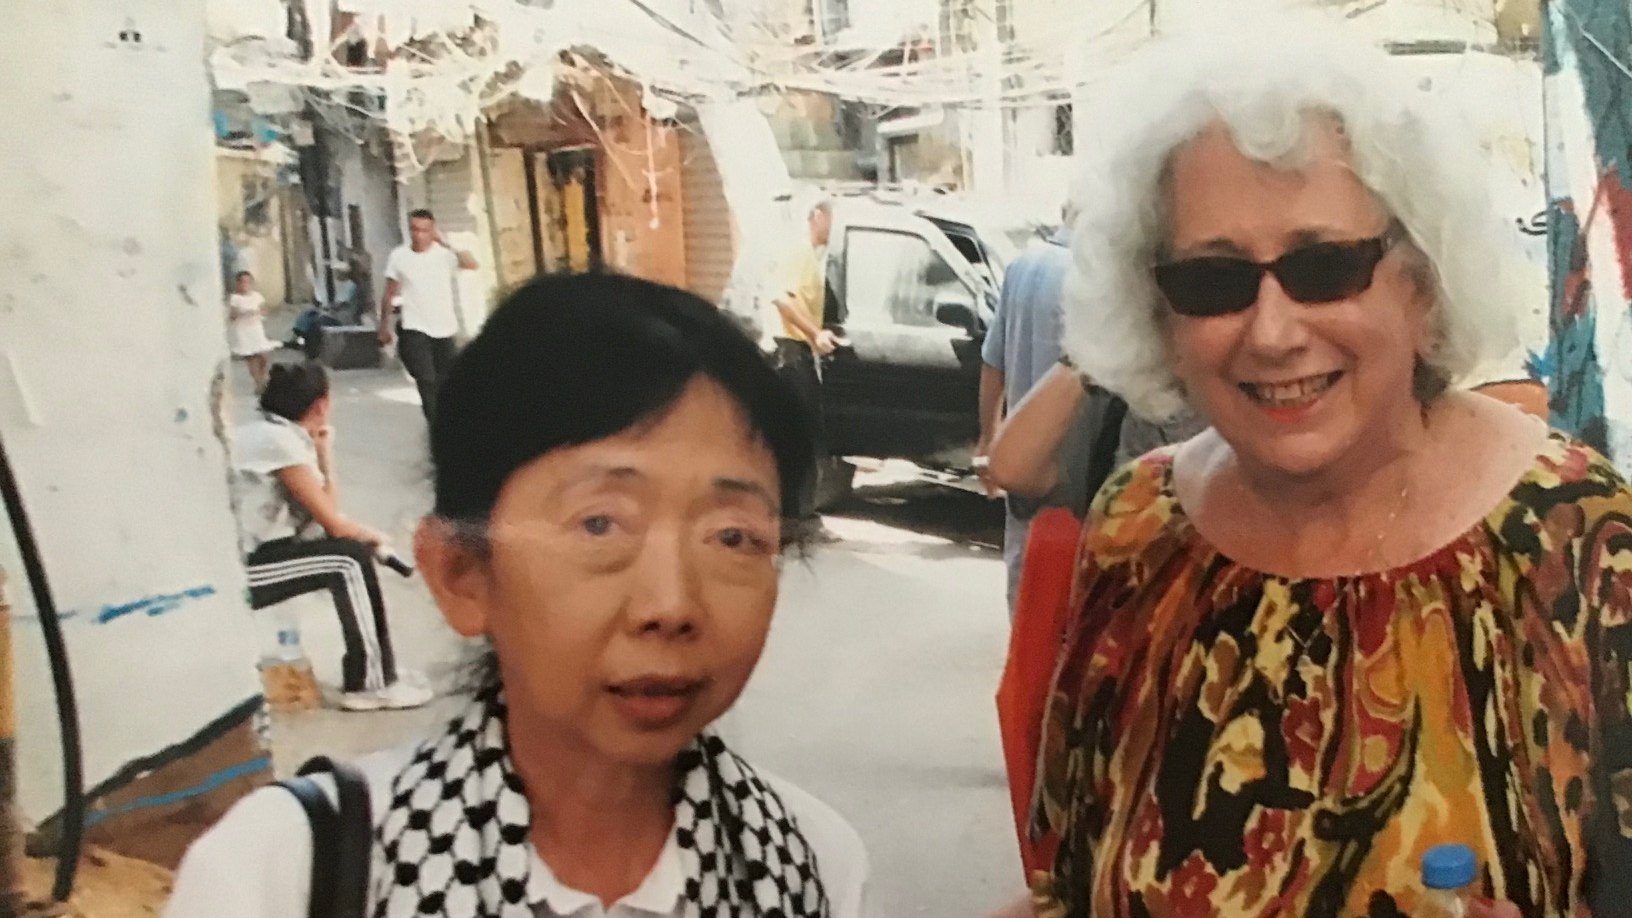 Ellen Siegel and Ang Swee Chai, a fellow medic present at the Sabra and Shatila massacre in 1982, during a visit to Beirut, Lebanon.